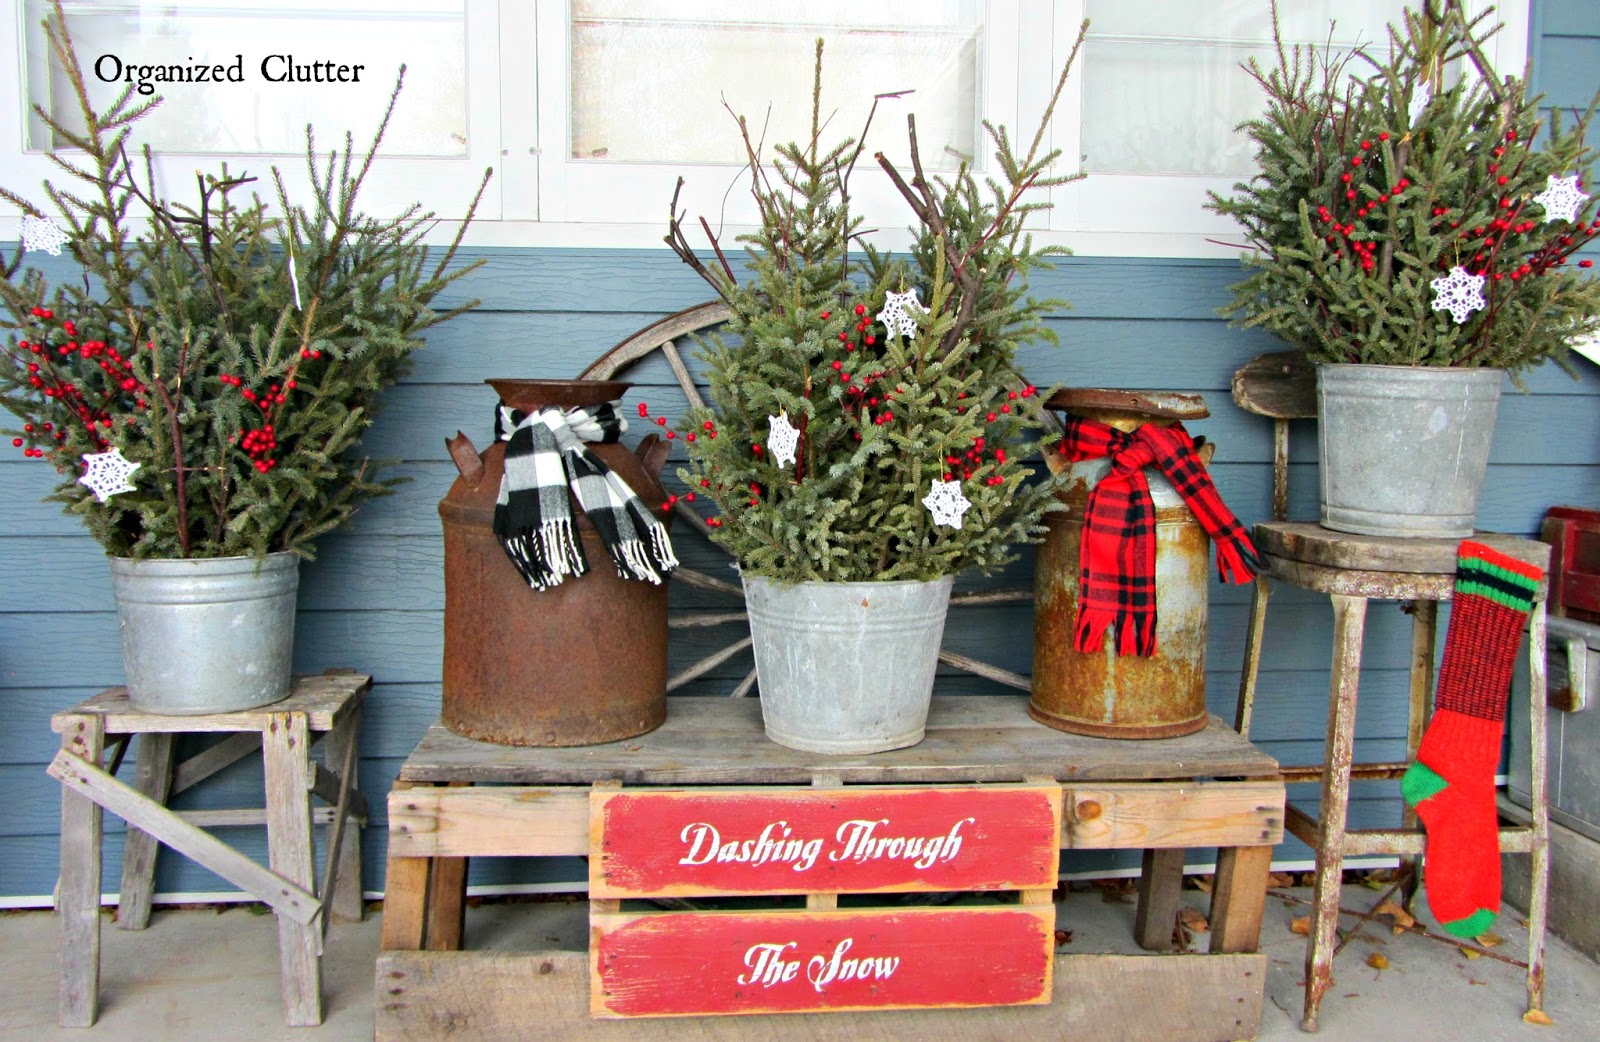 Rustic Canes With garland decoration